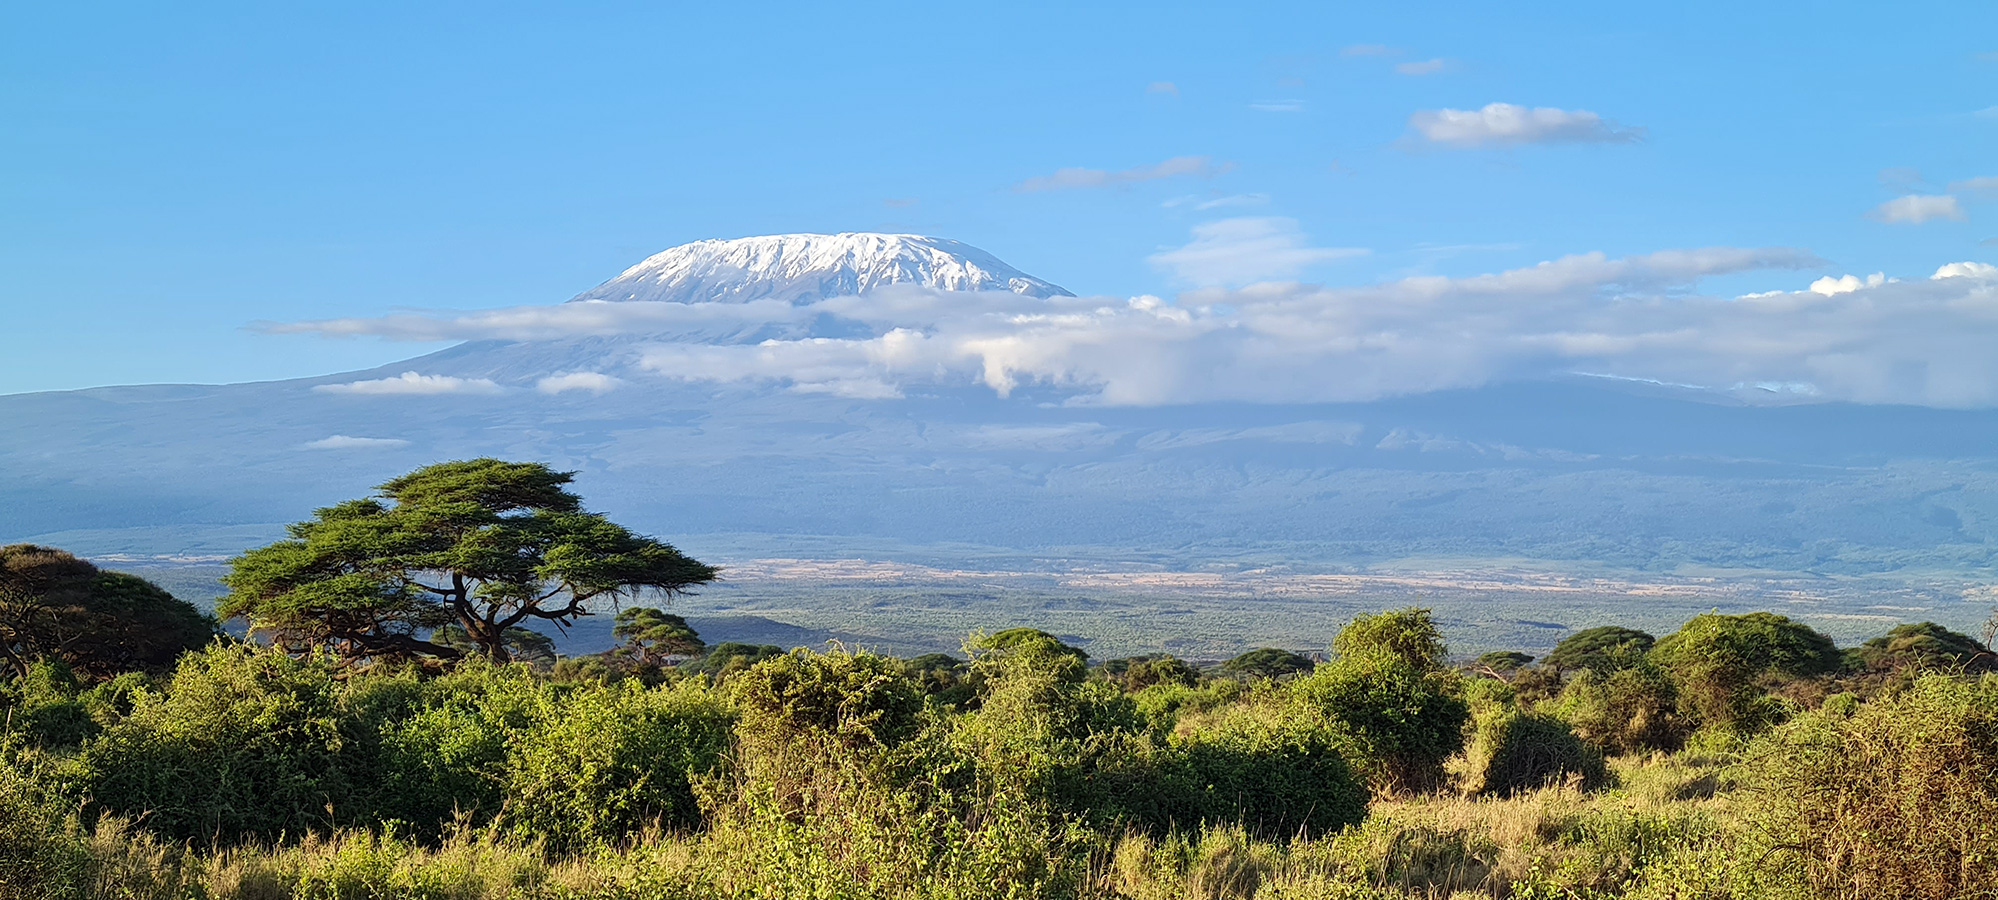 view of mount kilimanjaro from afar